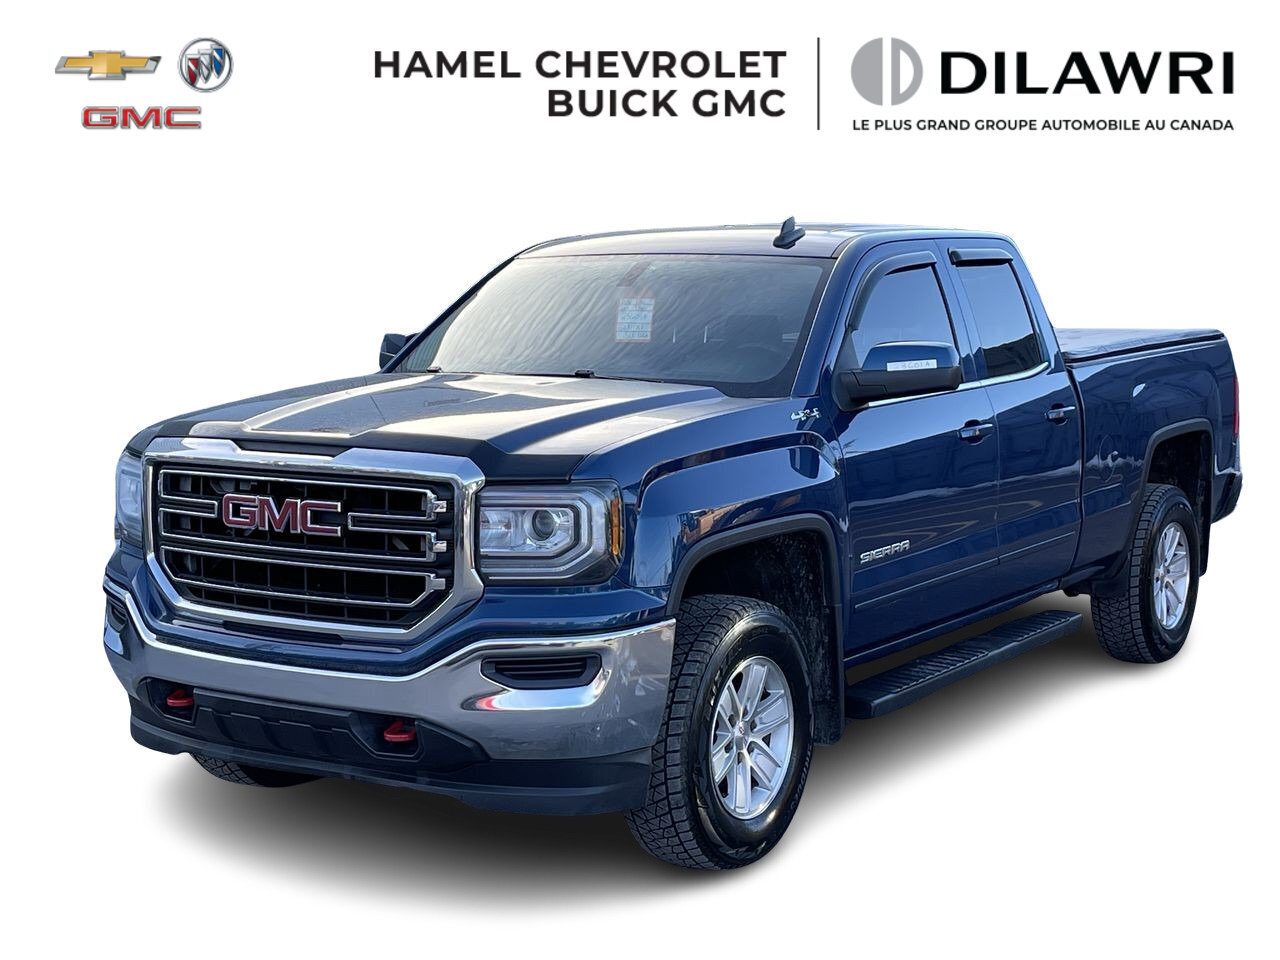 2016 GMC Sierra 1500 SLE AWD 4X4 DOUBLE CAB + 5.3L V8 + MARCHES-PIEDS +